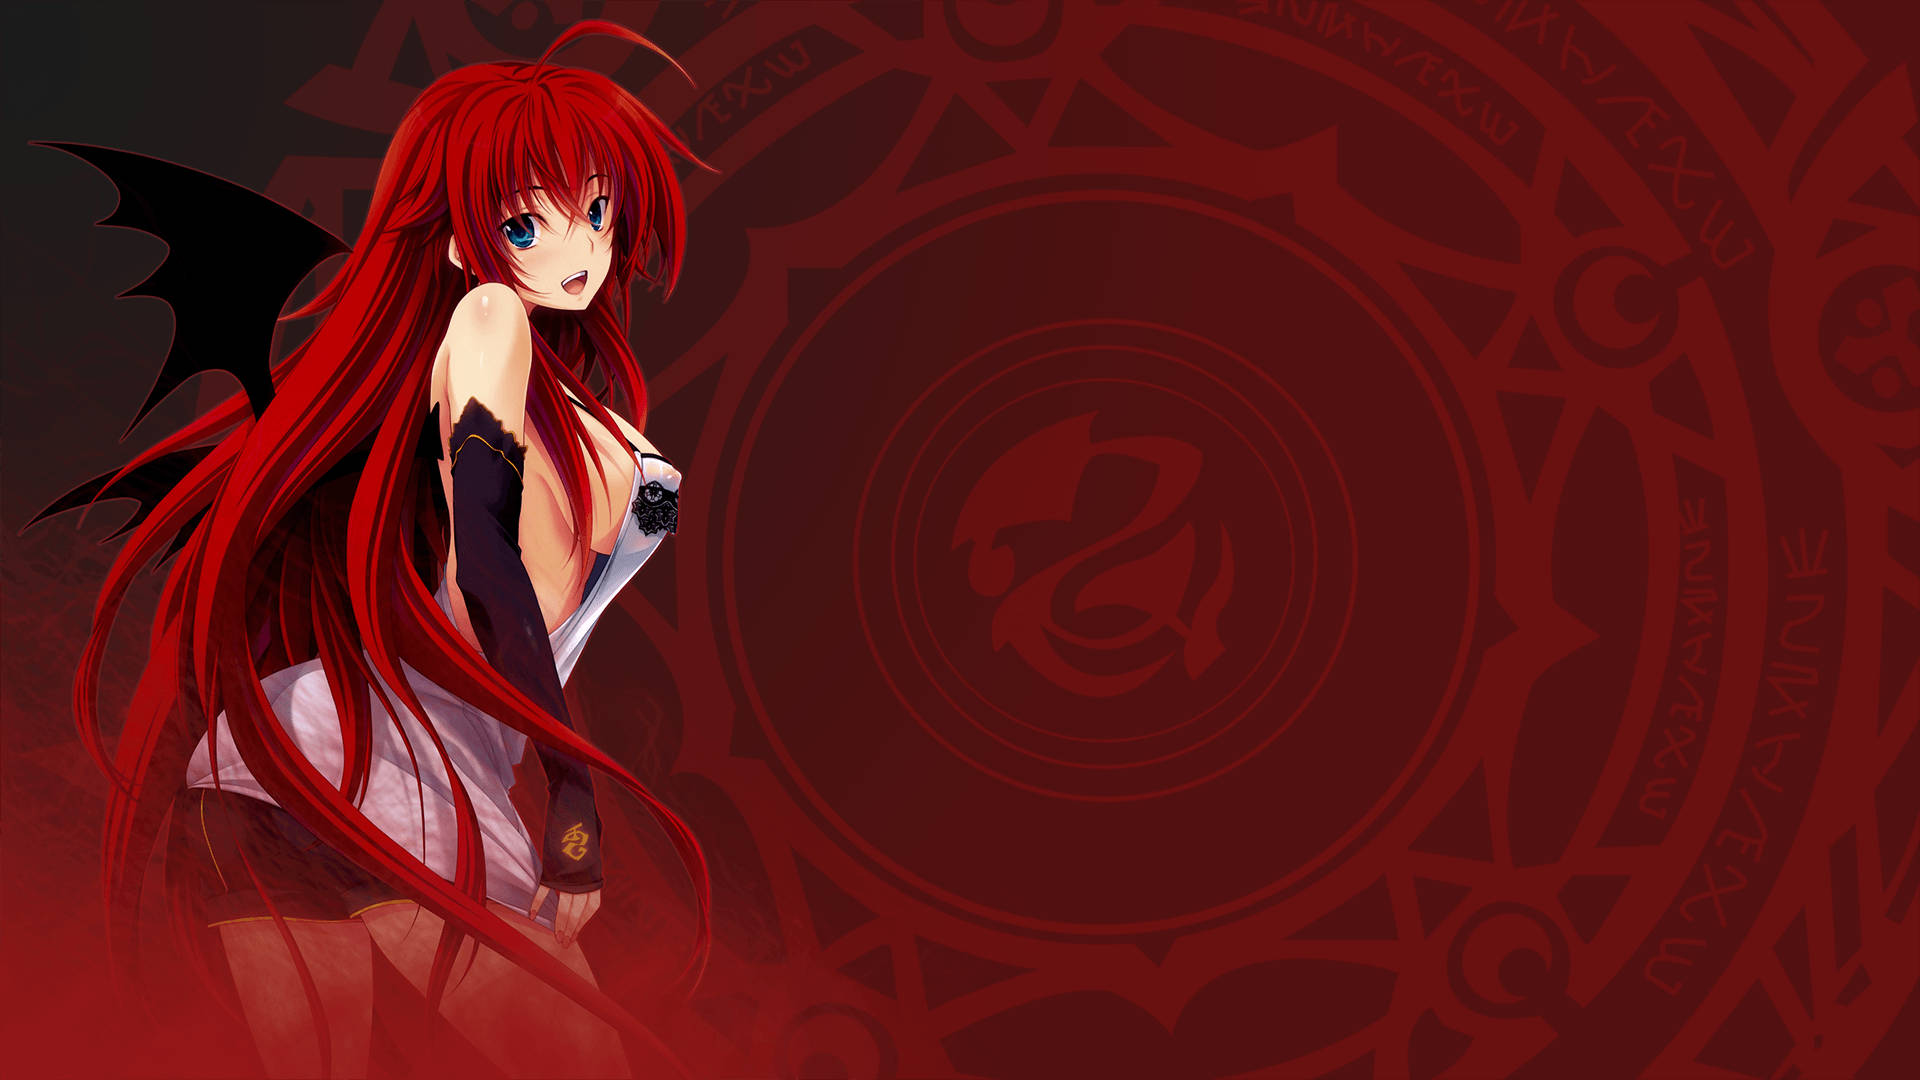 Rias Gremory Wallpapers